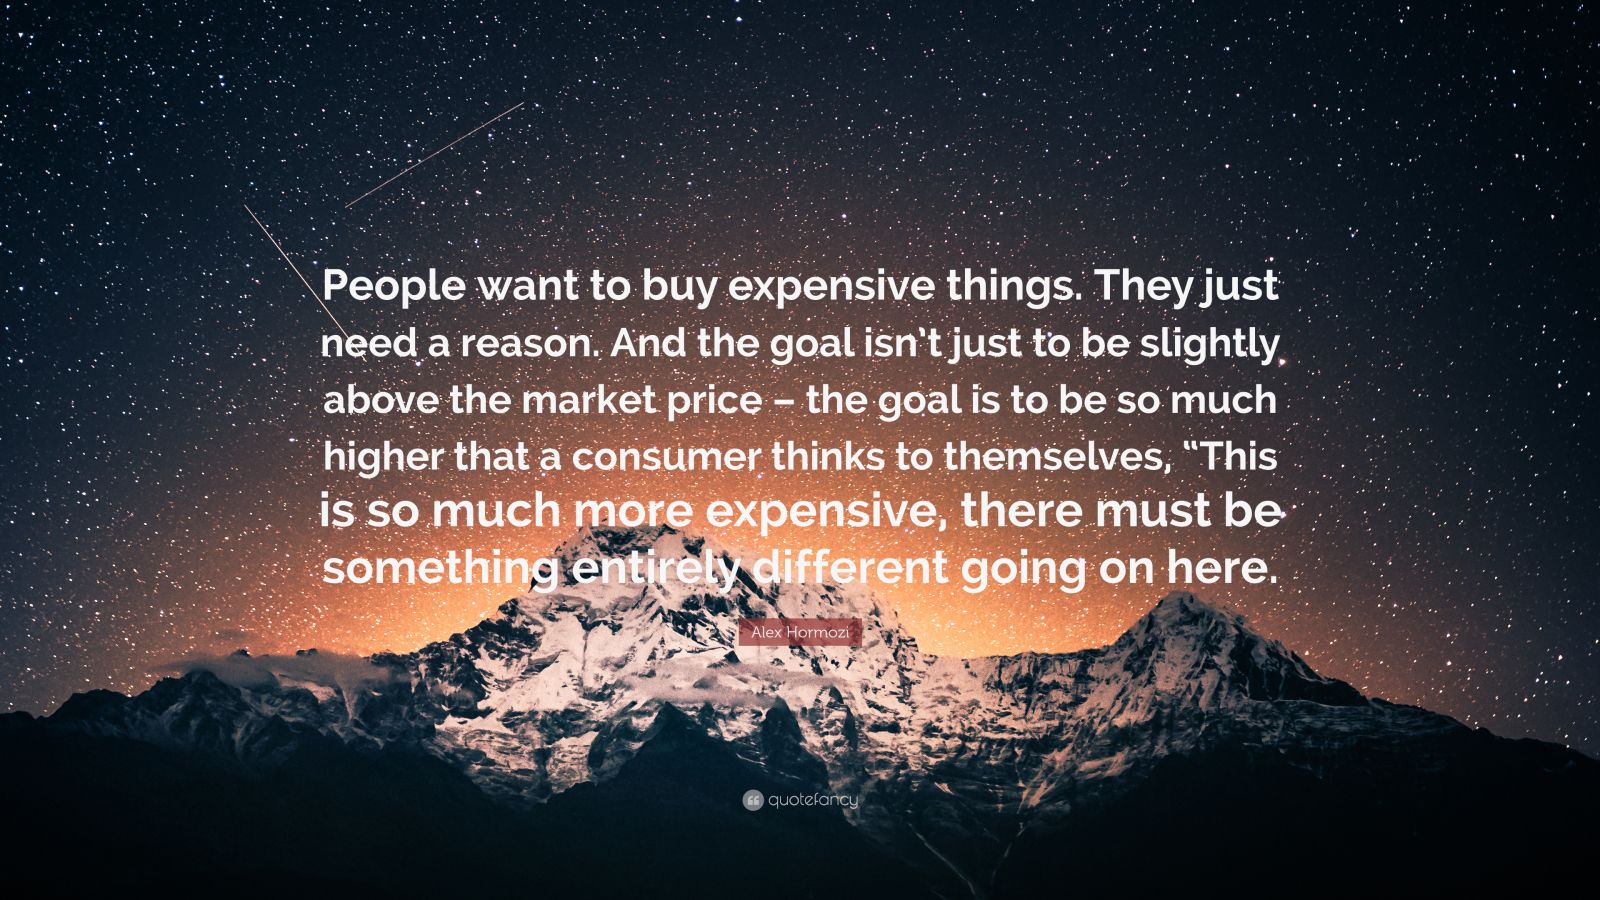 https://quotefancy.com/media/wallpaper/1600x900/8141894-Alex-Hormozi-Quote-People-want-to-buy-expensive-things-They-just-need-a-reason-And-the.jpg